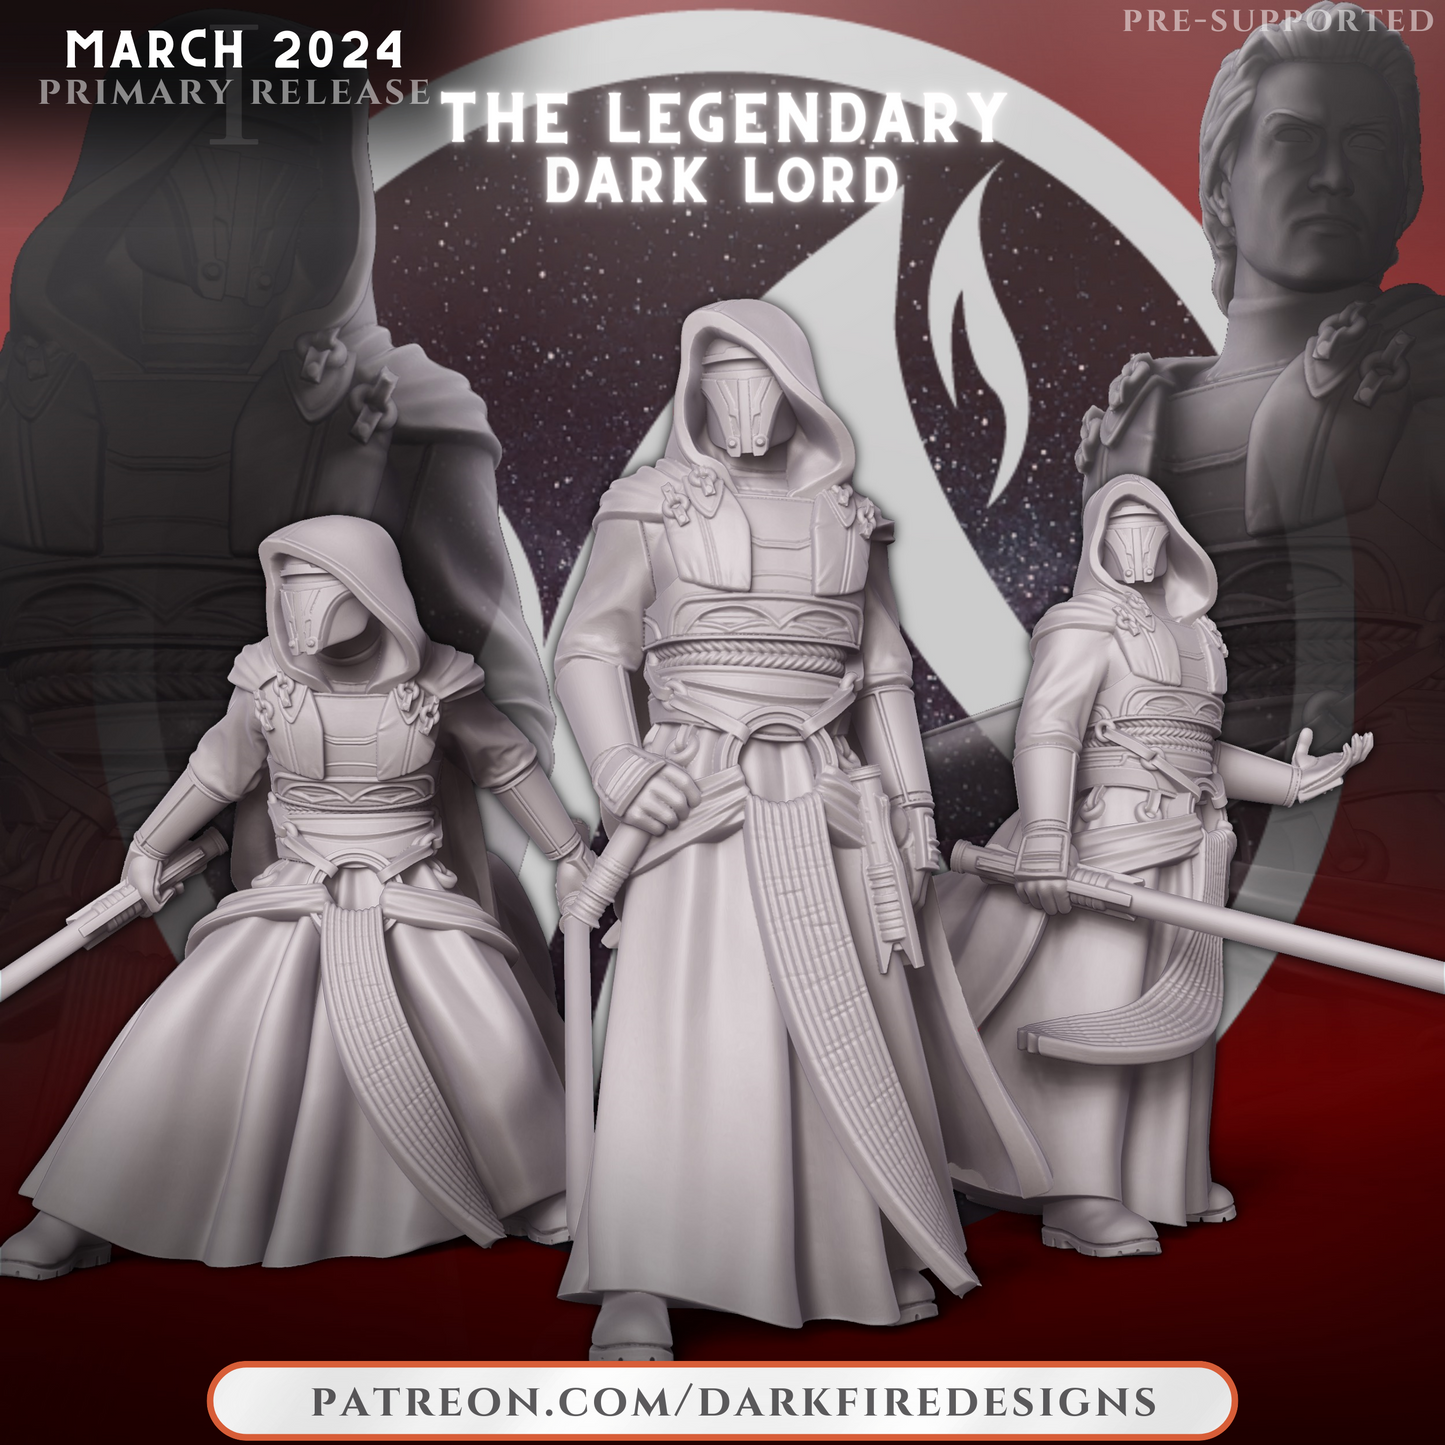 March 2024 Primary Patreon.com Release